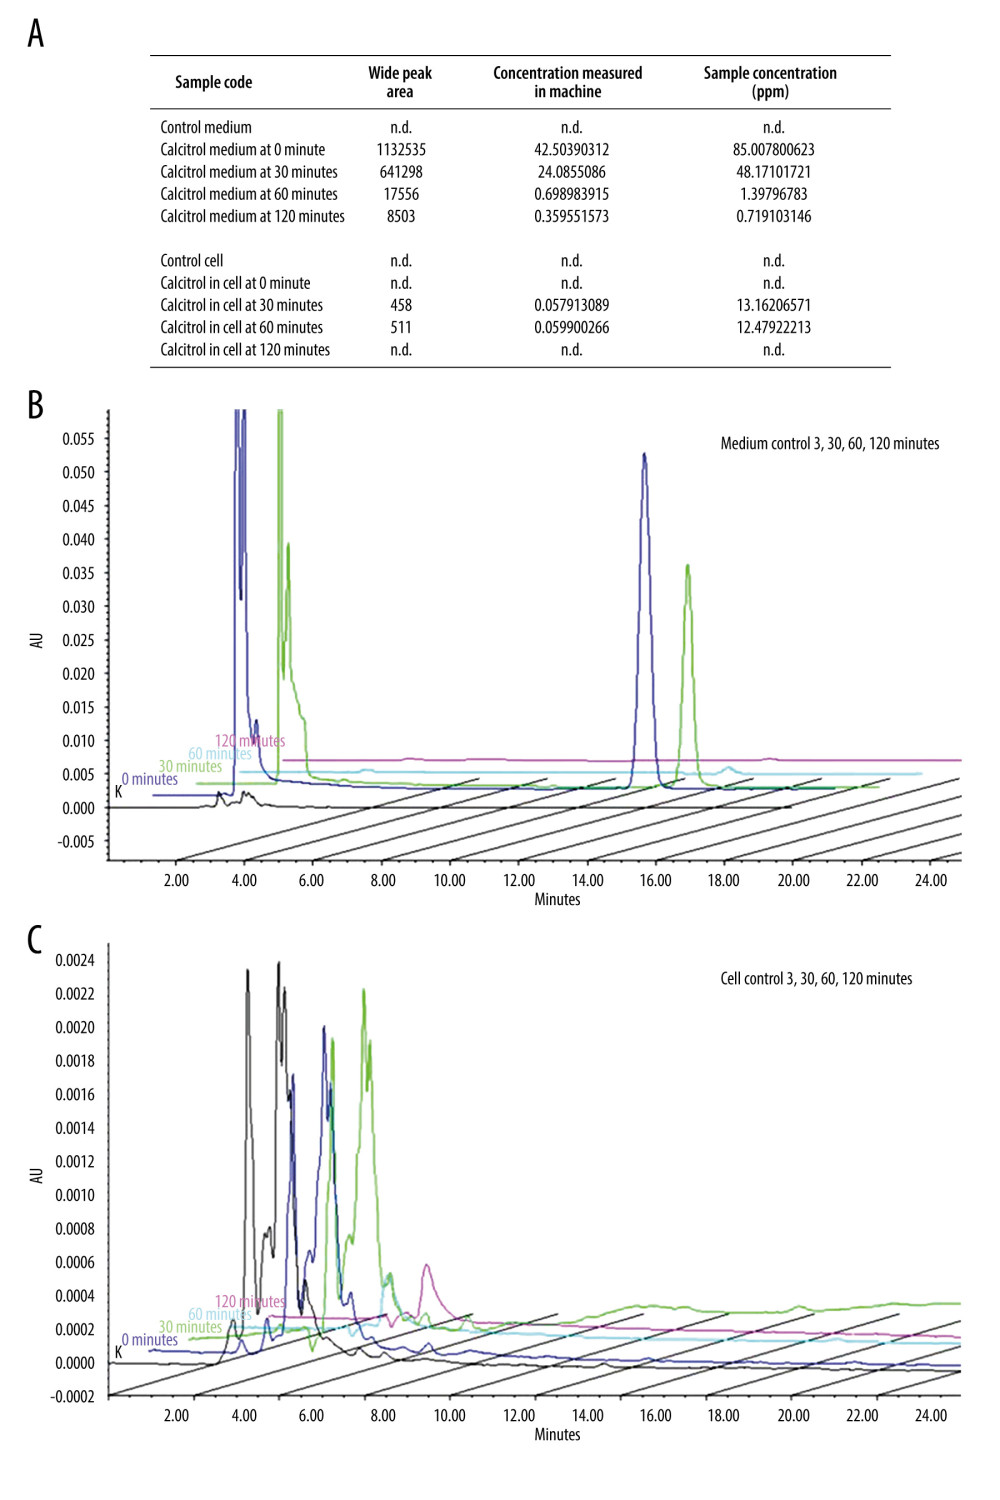 Calcitriol uptake study by B16–F10 cells by HPLC. (A) Detection of calcitriol content after time-dependent treatment in B16–F10 cells and medium. In the medium, calcitriol content was detected at 0 and 30 min. Although low, calcitriol was still detected at 60 and 120 min, while in the cell, the calcitriol content was detected at 30 and 60 min. (B) Compilation of representative peak curve HPLC of control baseline at 0 min, 30 min, 60 min, and 120 min showed calcitriol content detection inside the medium. (C) Compilation of representative peak curve HPLC of control baseline at 0 min, 30 min, 60 min, and 120 min showed calcitriol content detection inside the medium.